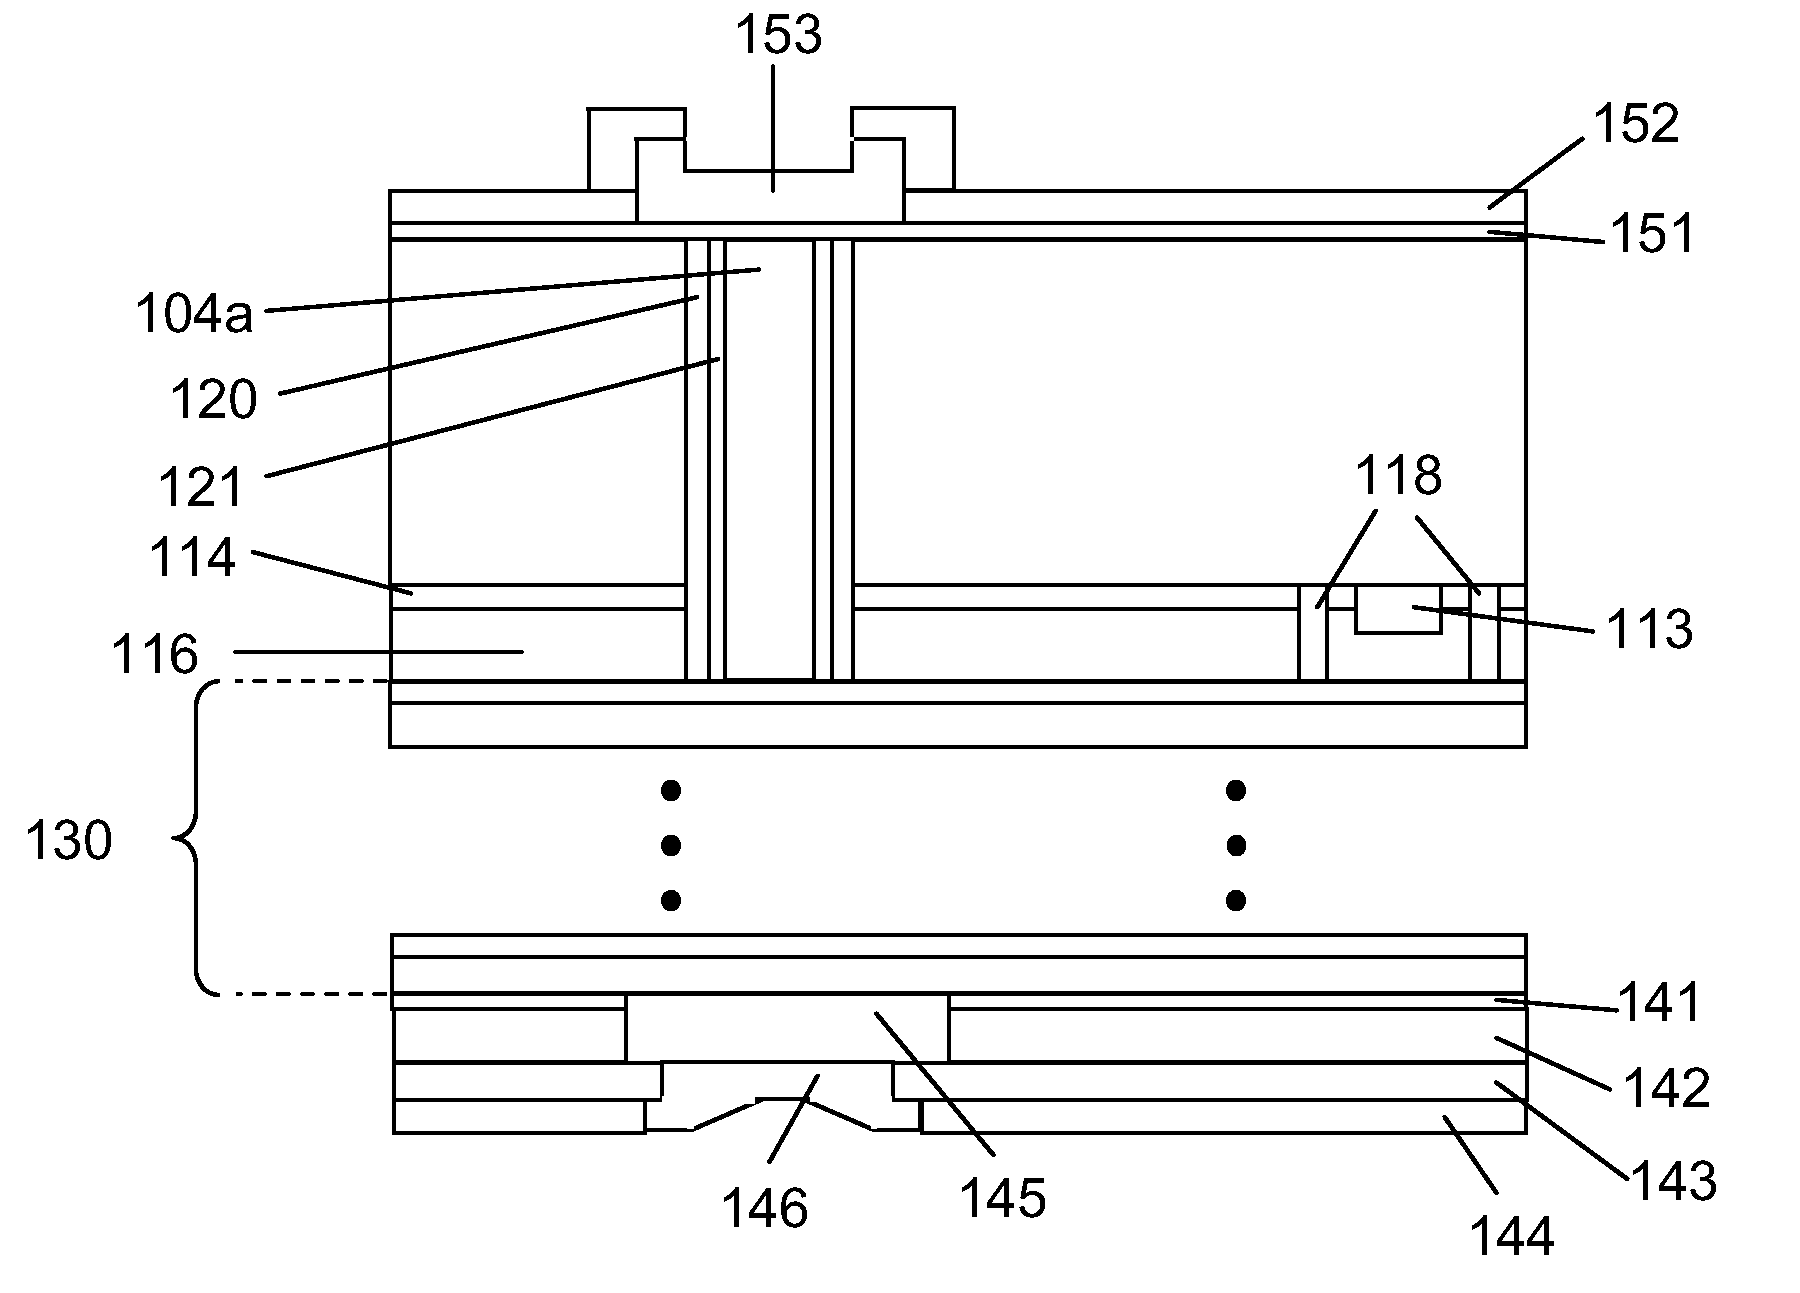 Through-Silicon Via Sidewall Isolation Structure